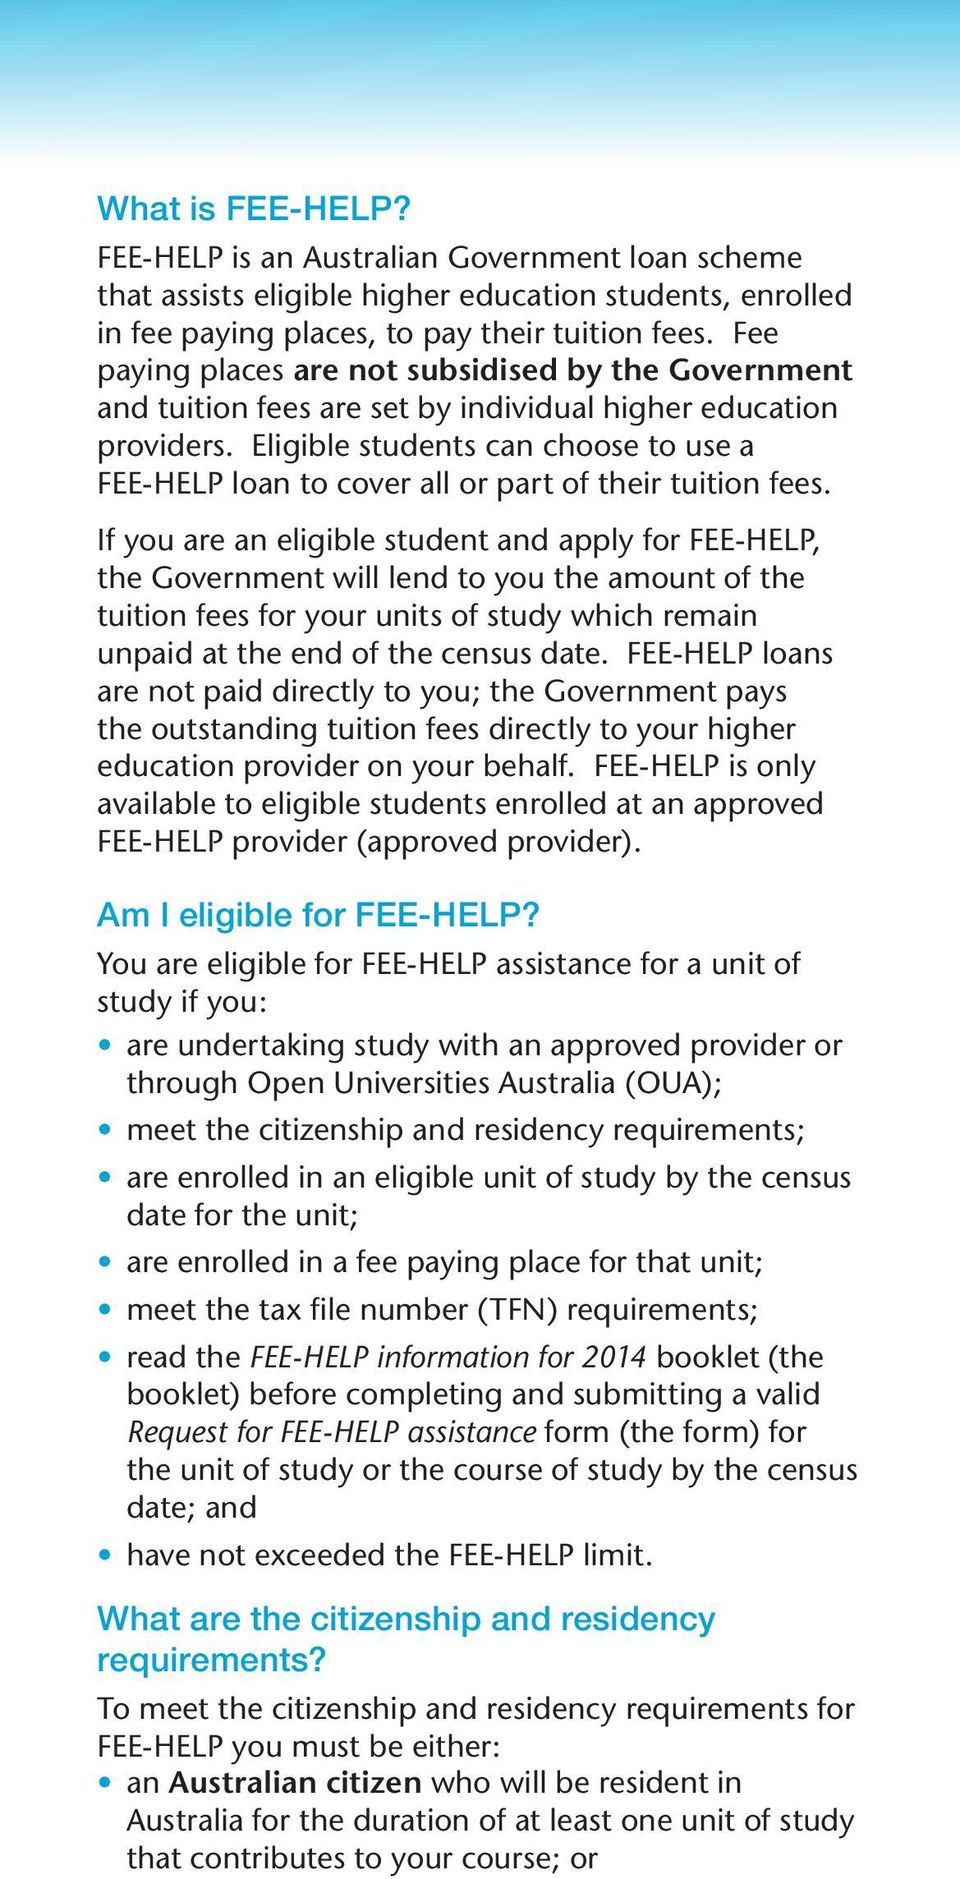 Eligible students can choose to use a FEE-HELP loan to cover all or part of their tuition fees.